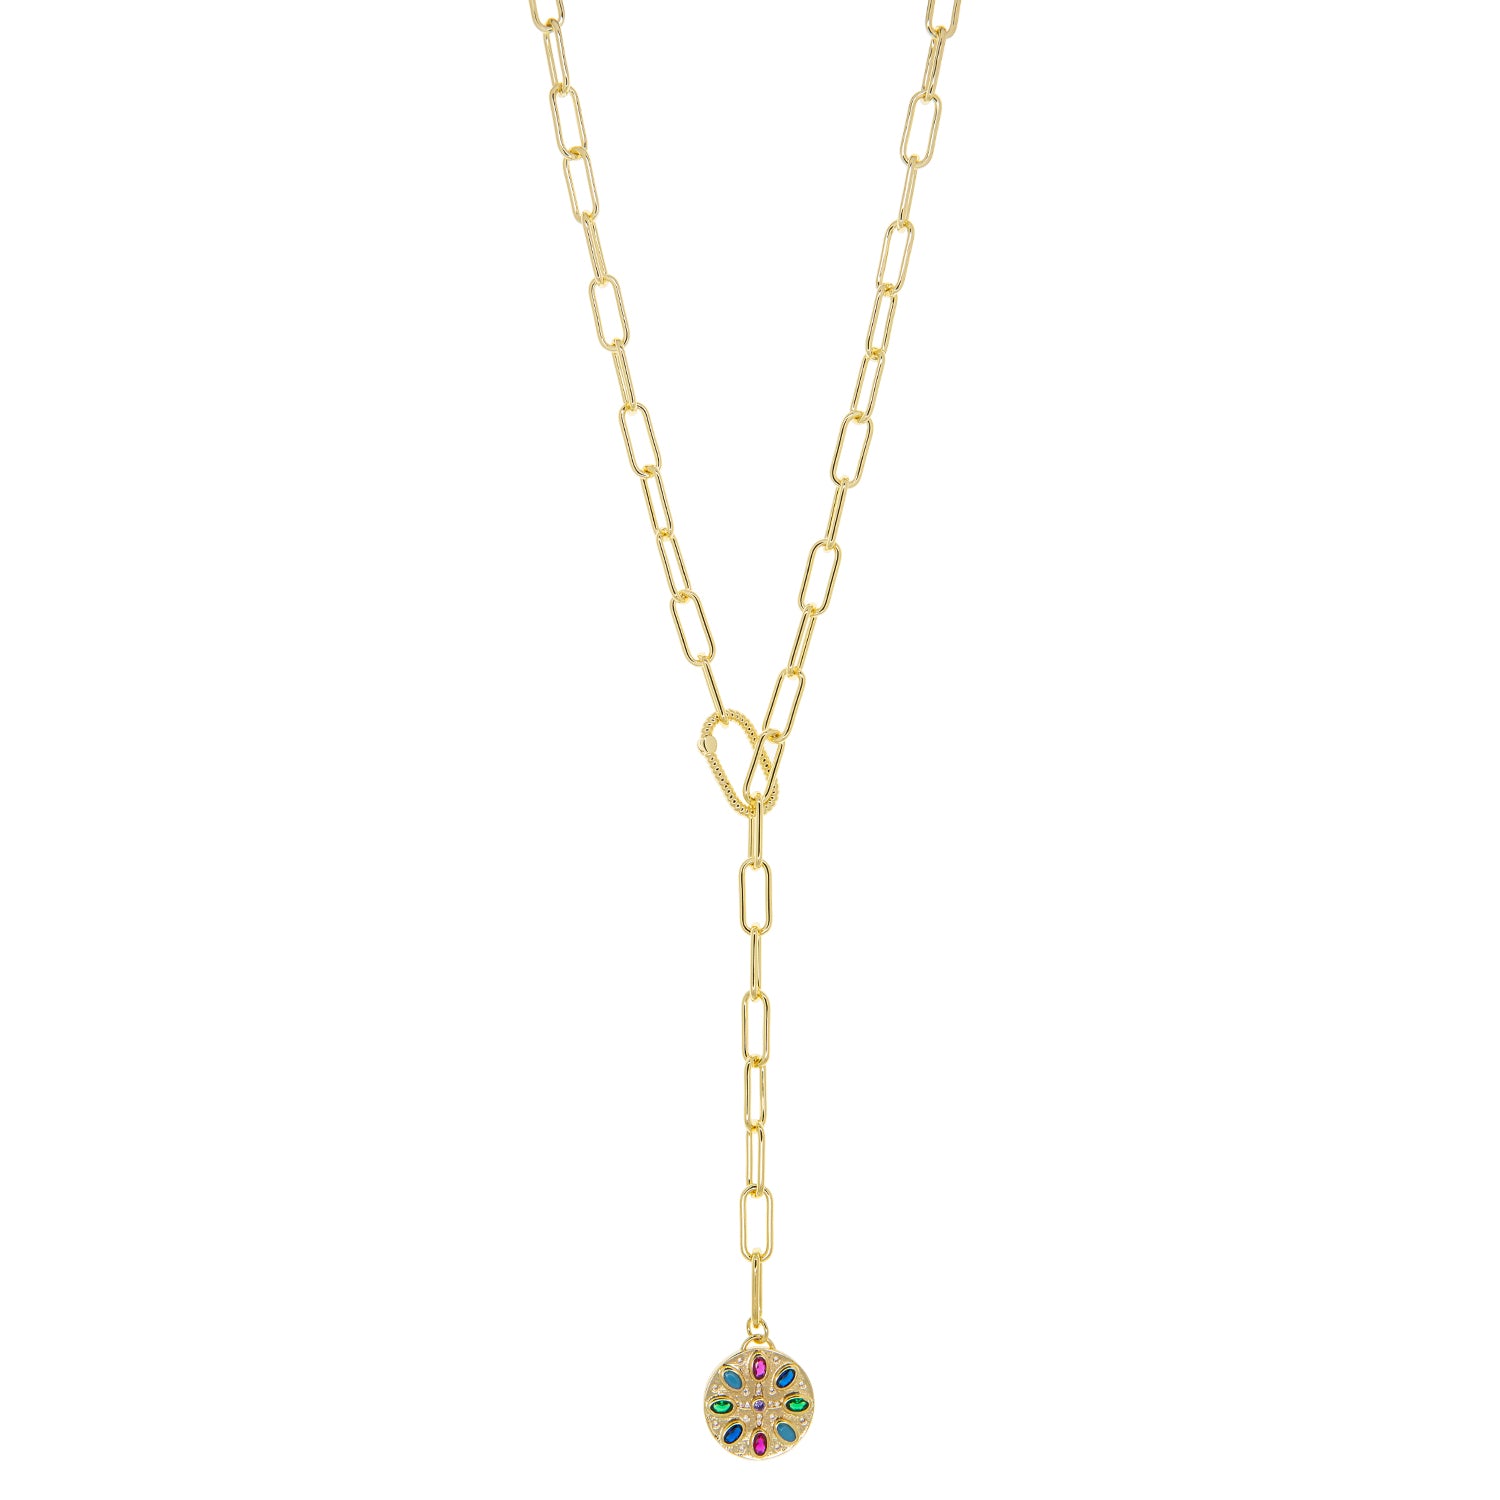 gold plated paperclip "Y" necklace with colored flower pendant